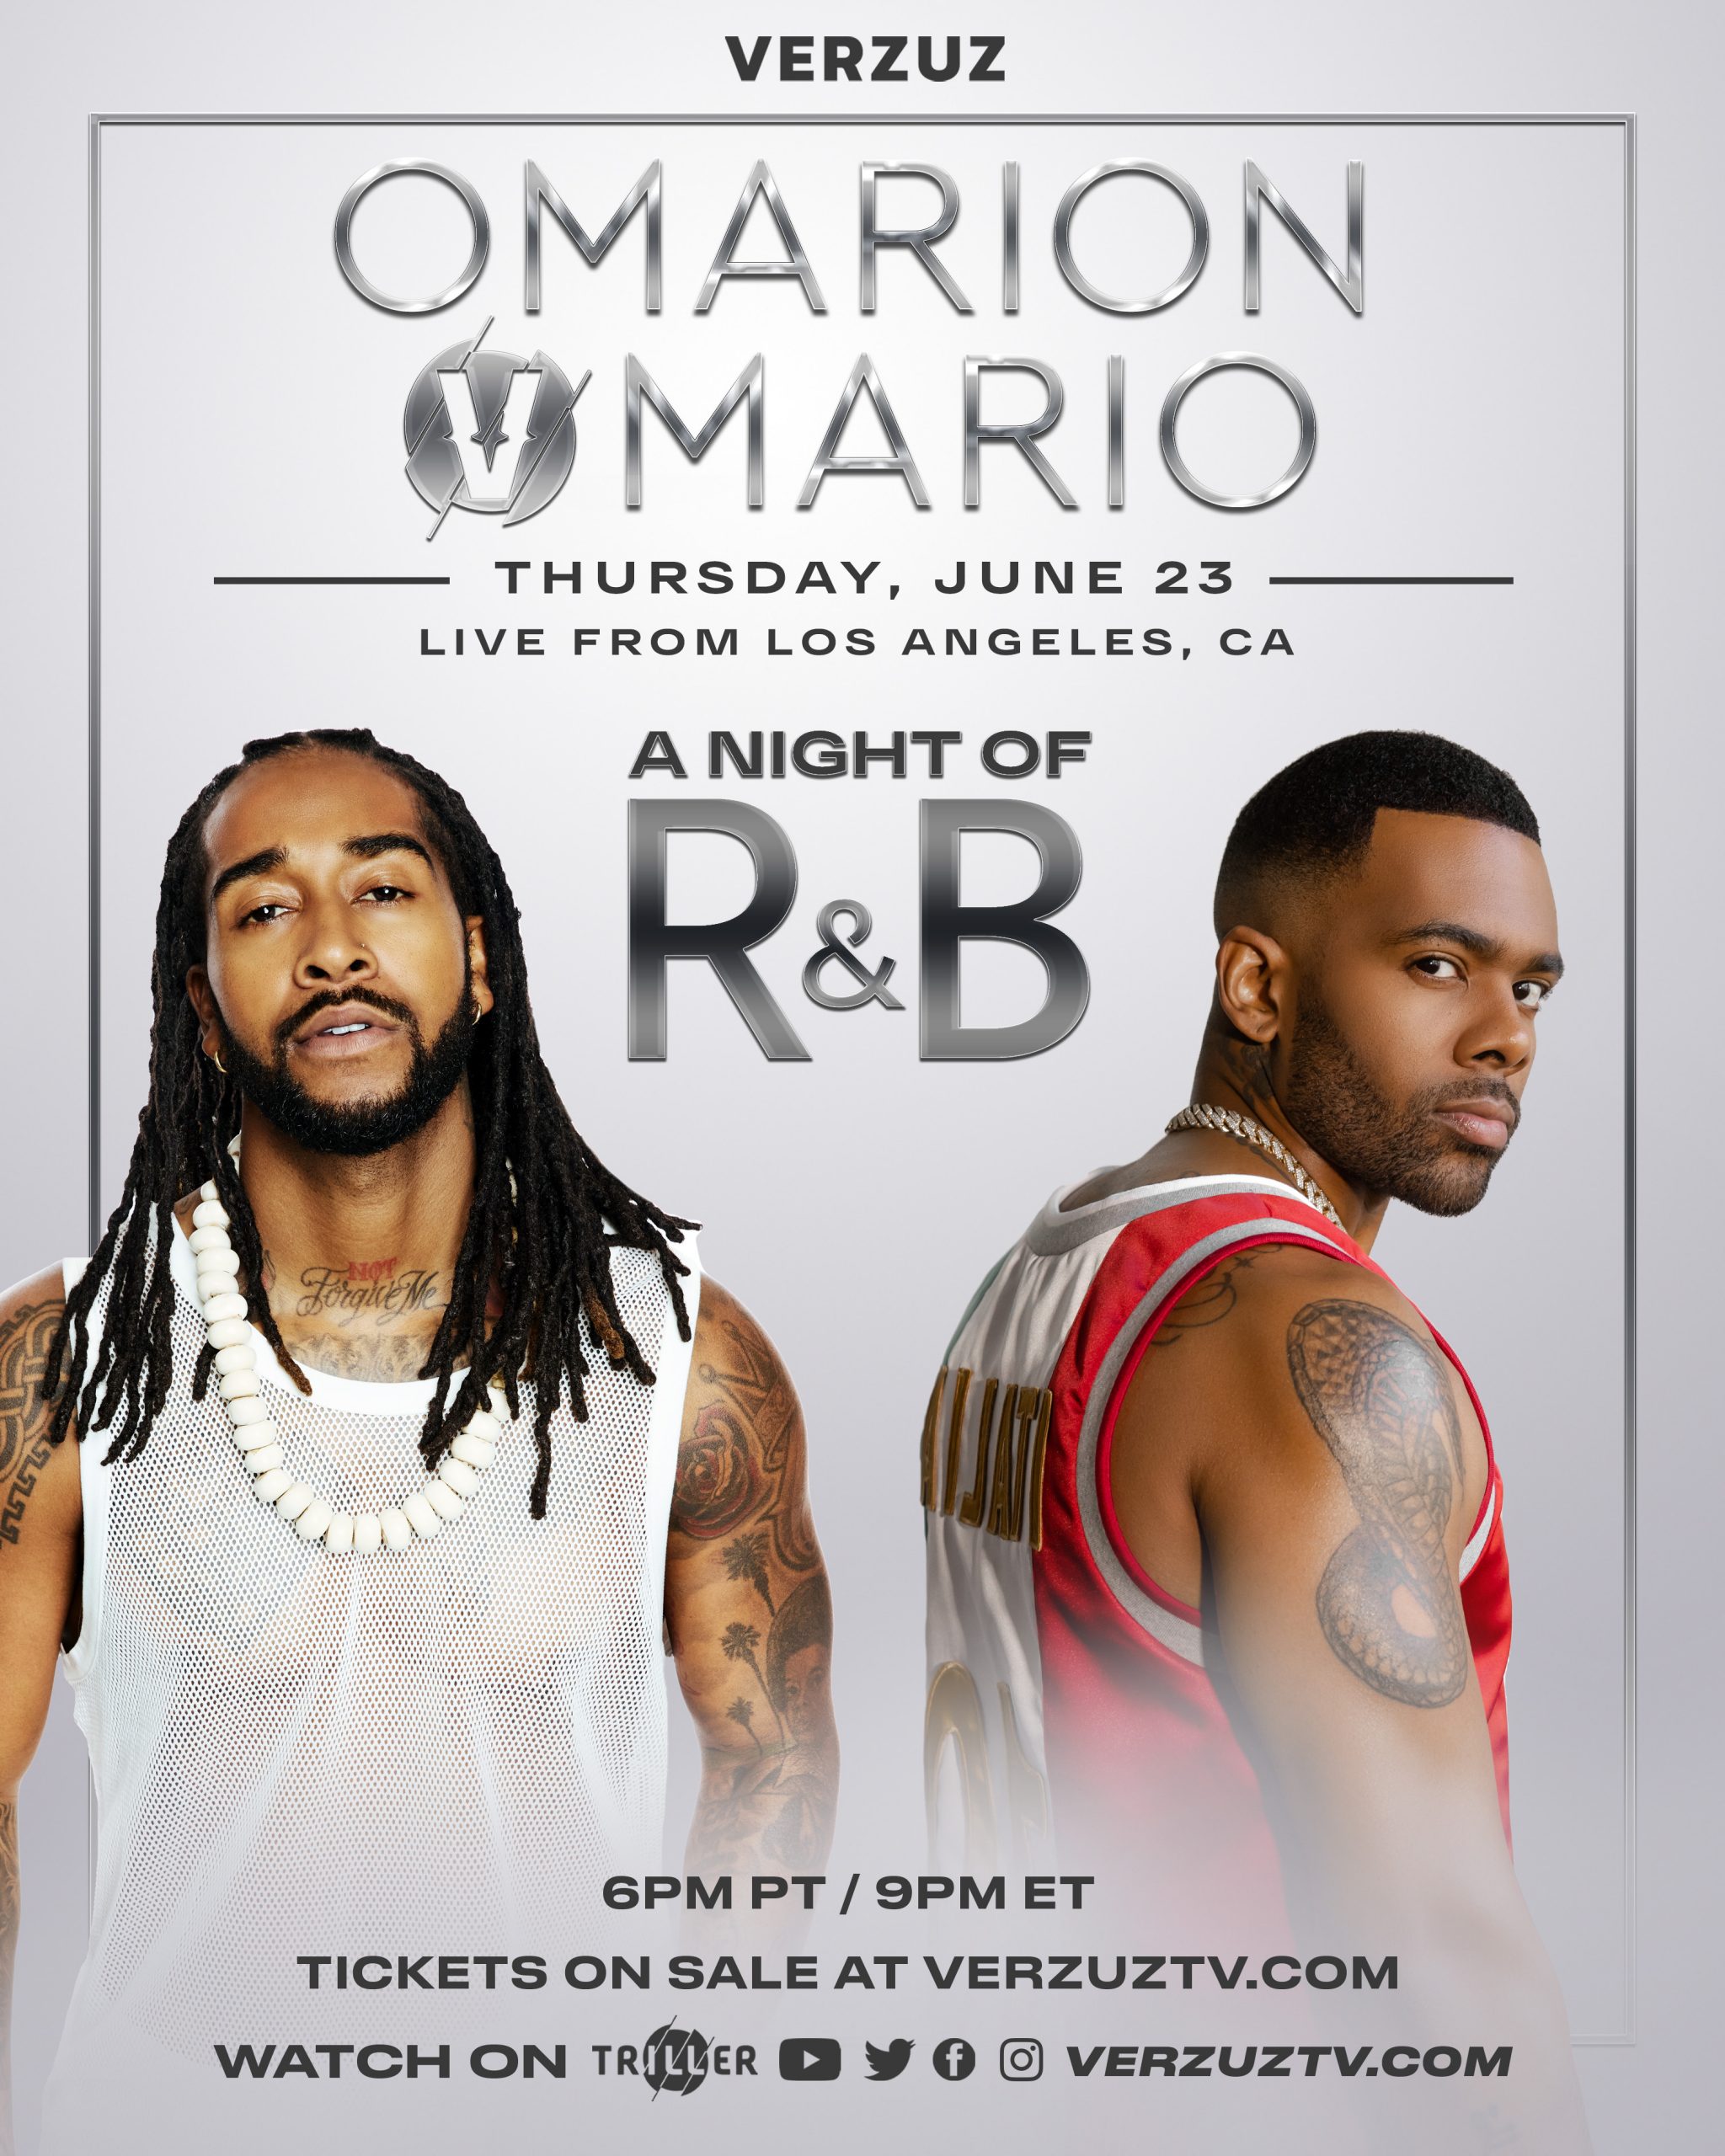 Omarion and Mario Set to Headline 'A Night of R&B' VERZUZ